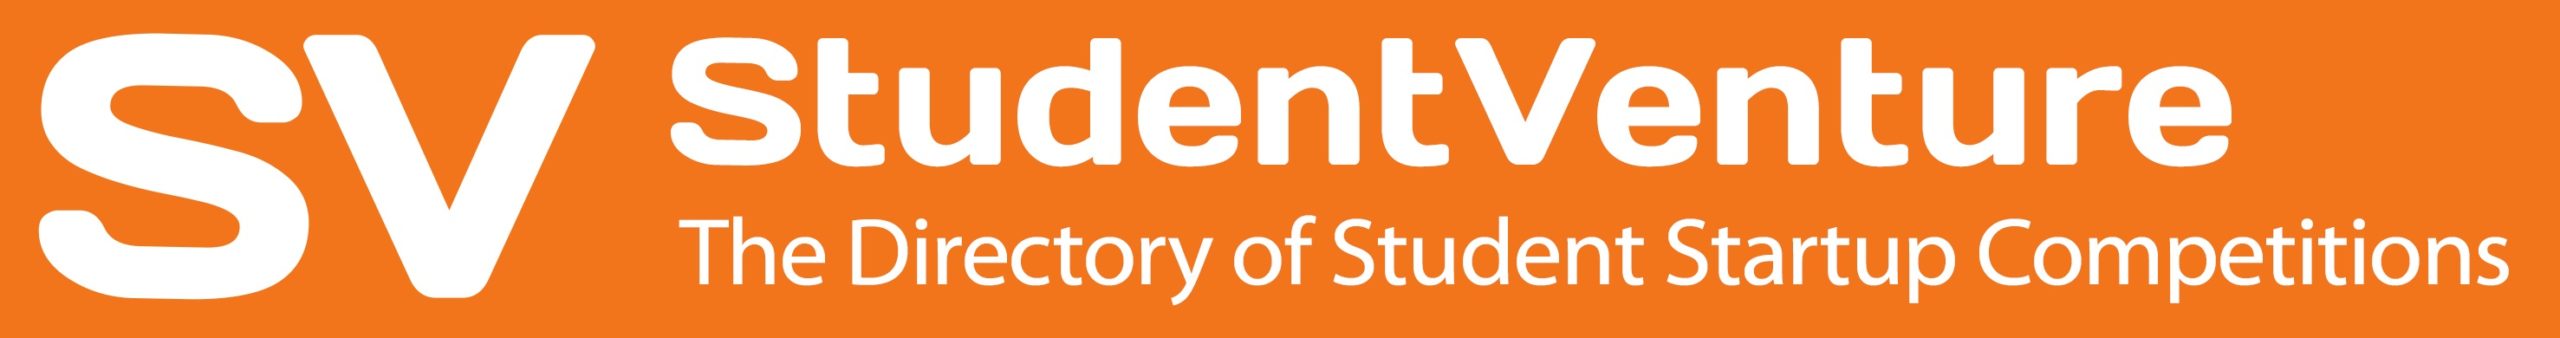 College Press Releases 2Market Information Inc. launches StudentVentureTM – the first and only directory and database of student startup competitions